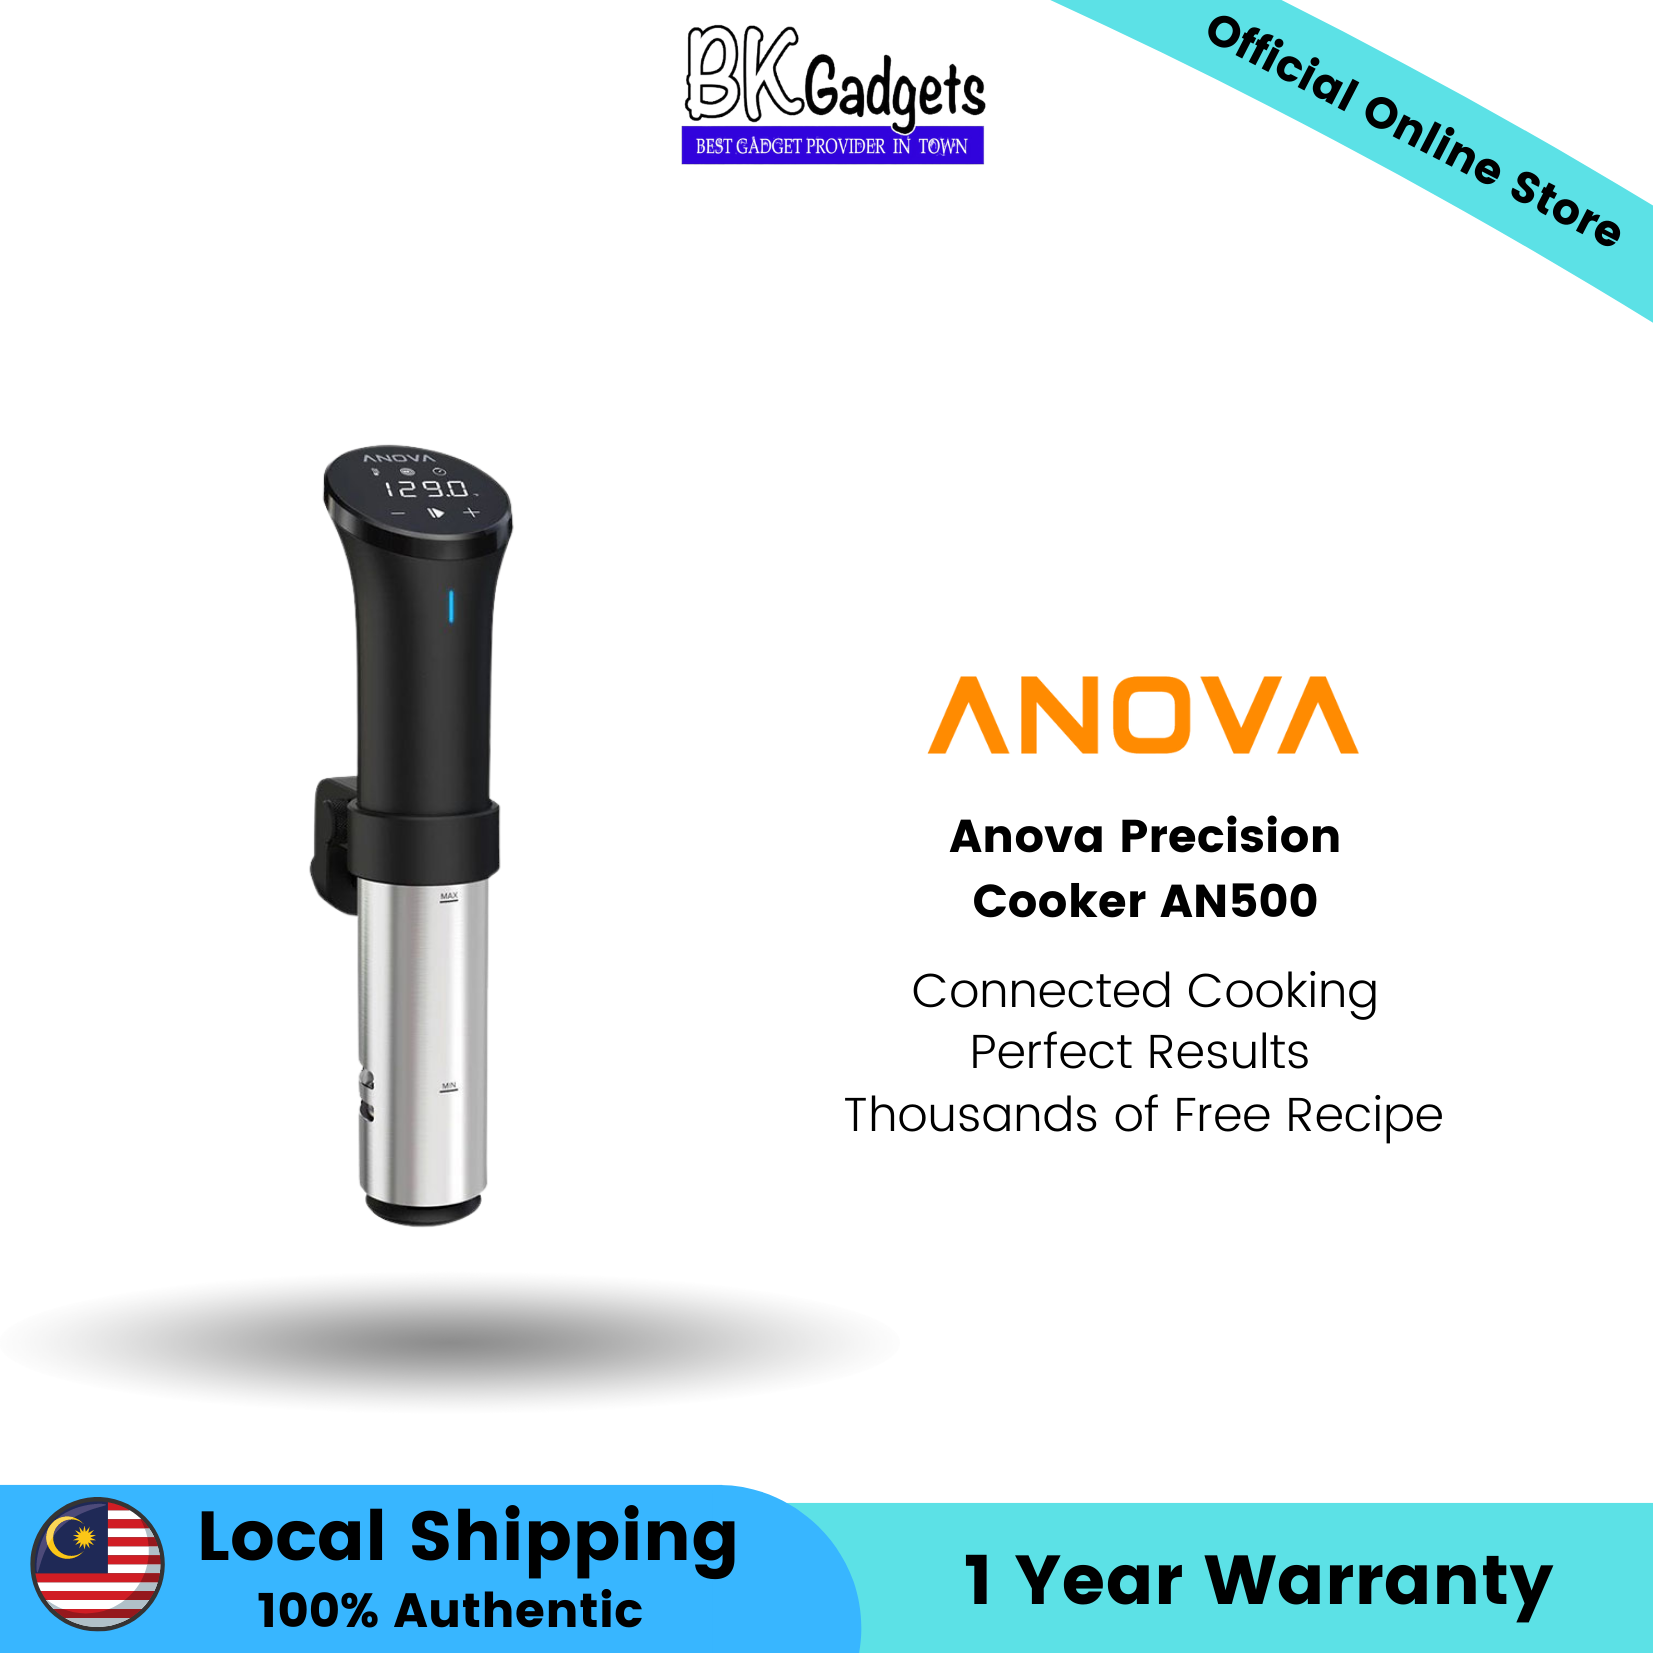 Anova Precision Cooker AN500 | Connected Cooking | Perfect Results | Thousands of Free Recipe